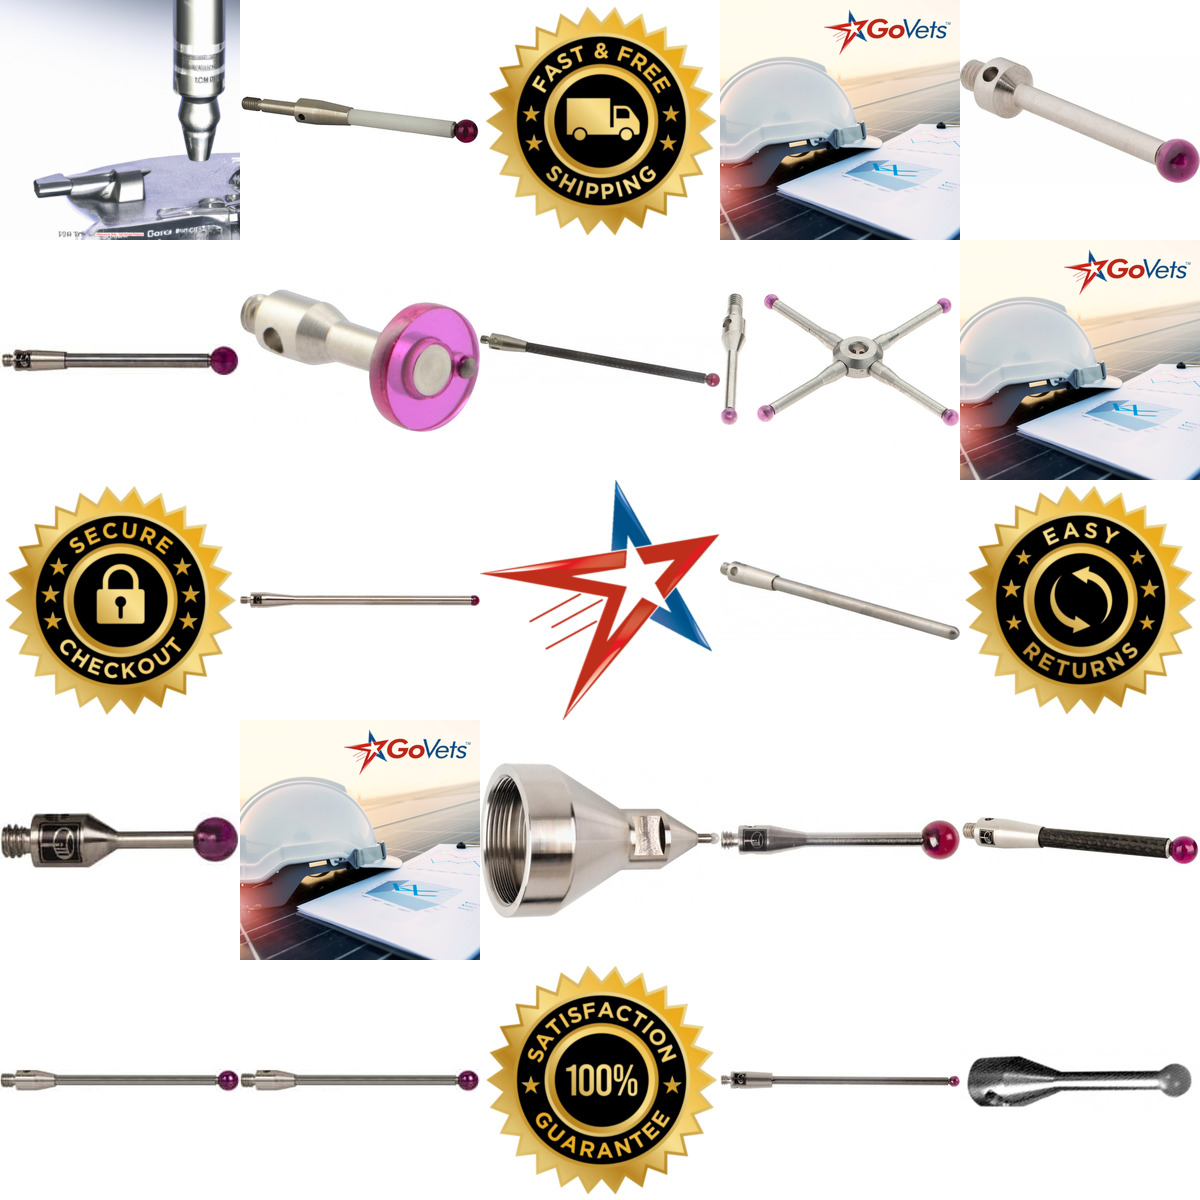 A selection of Cmm Styli and Probes products on GoVets